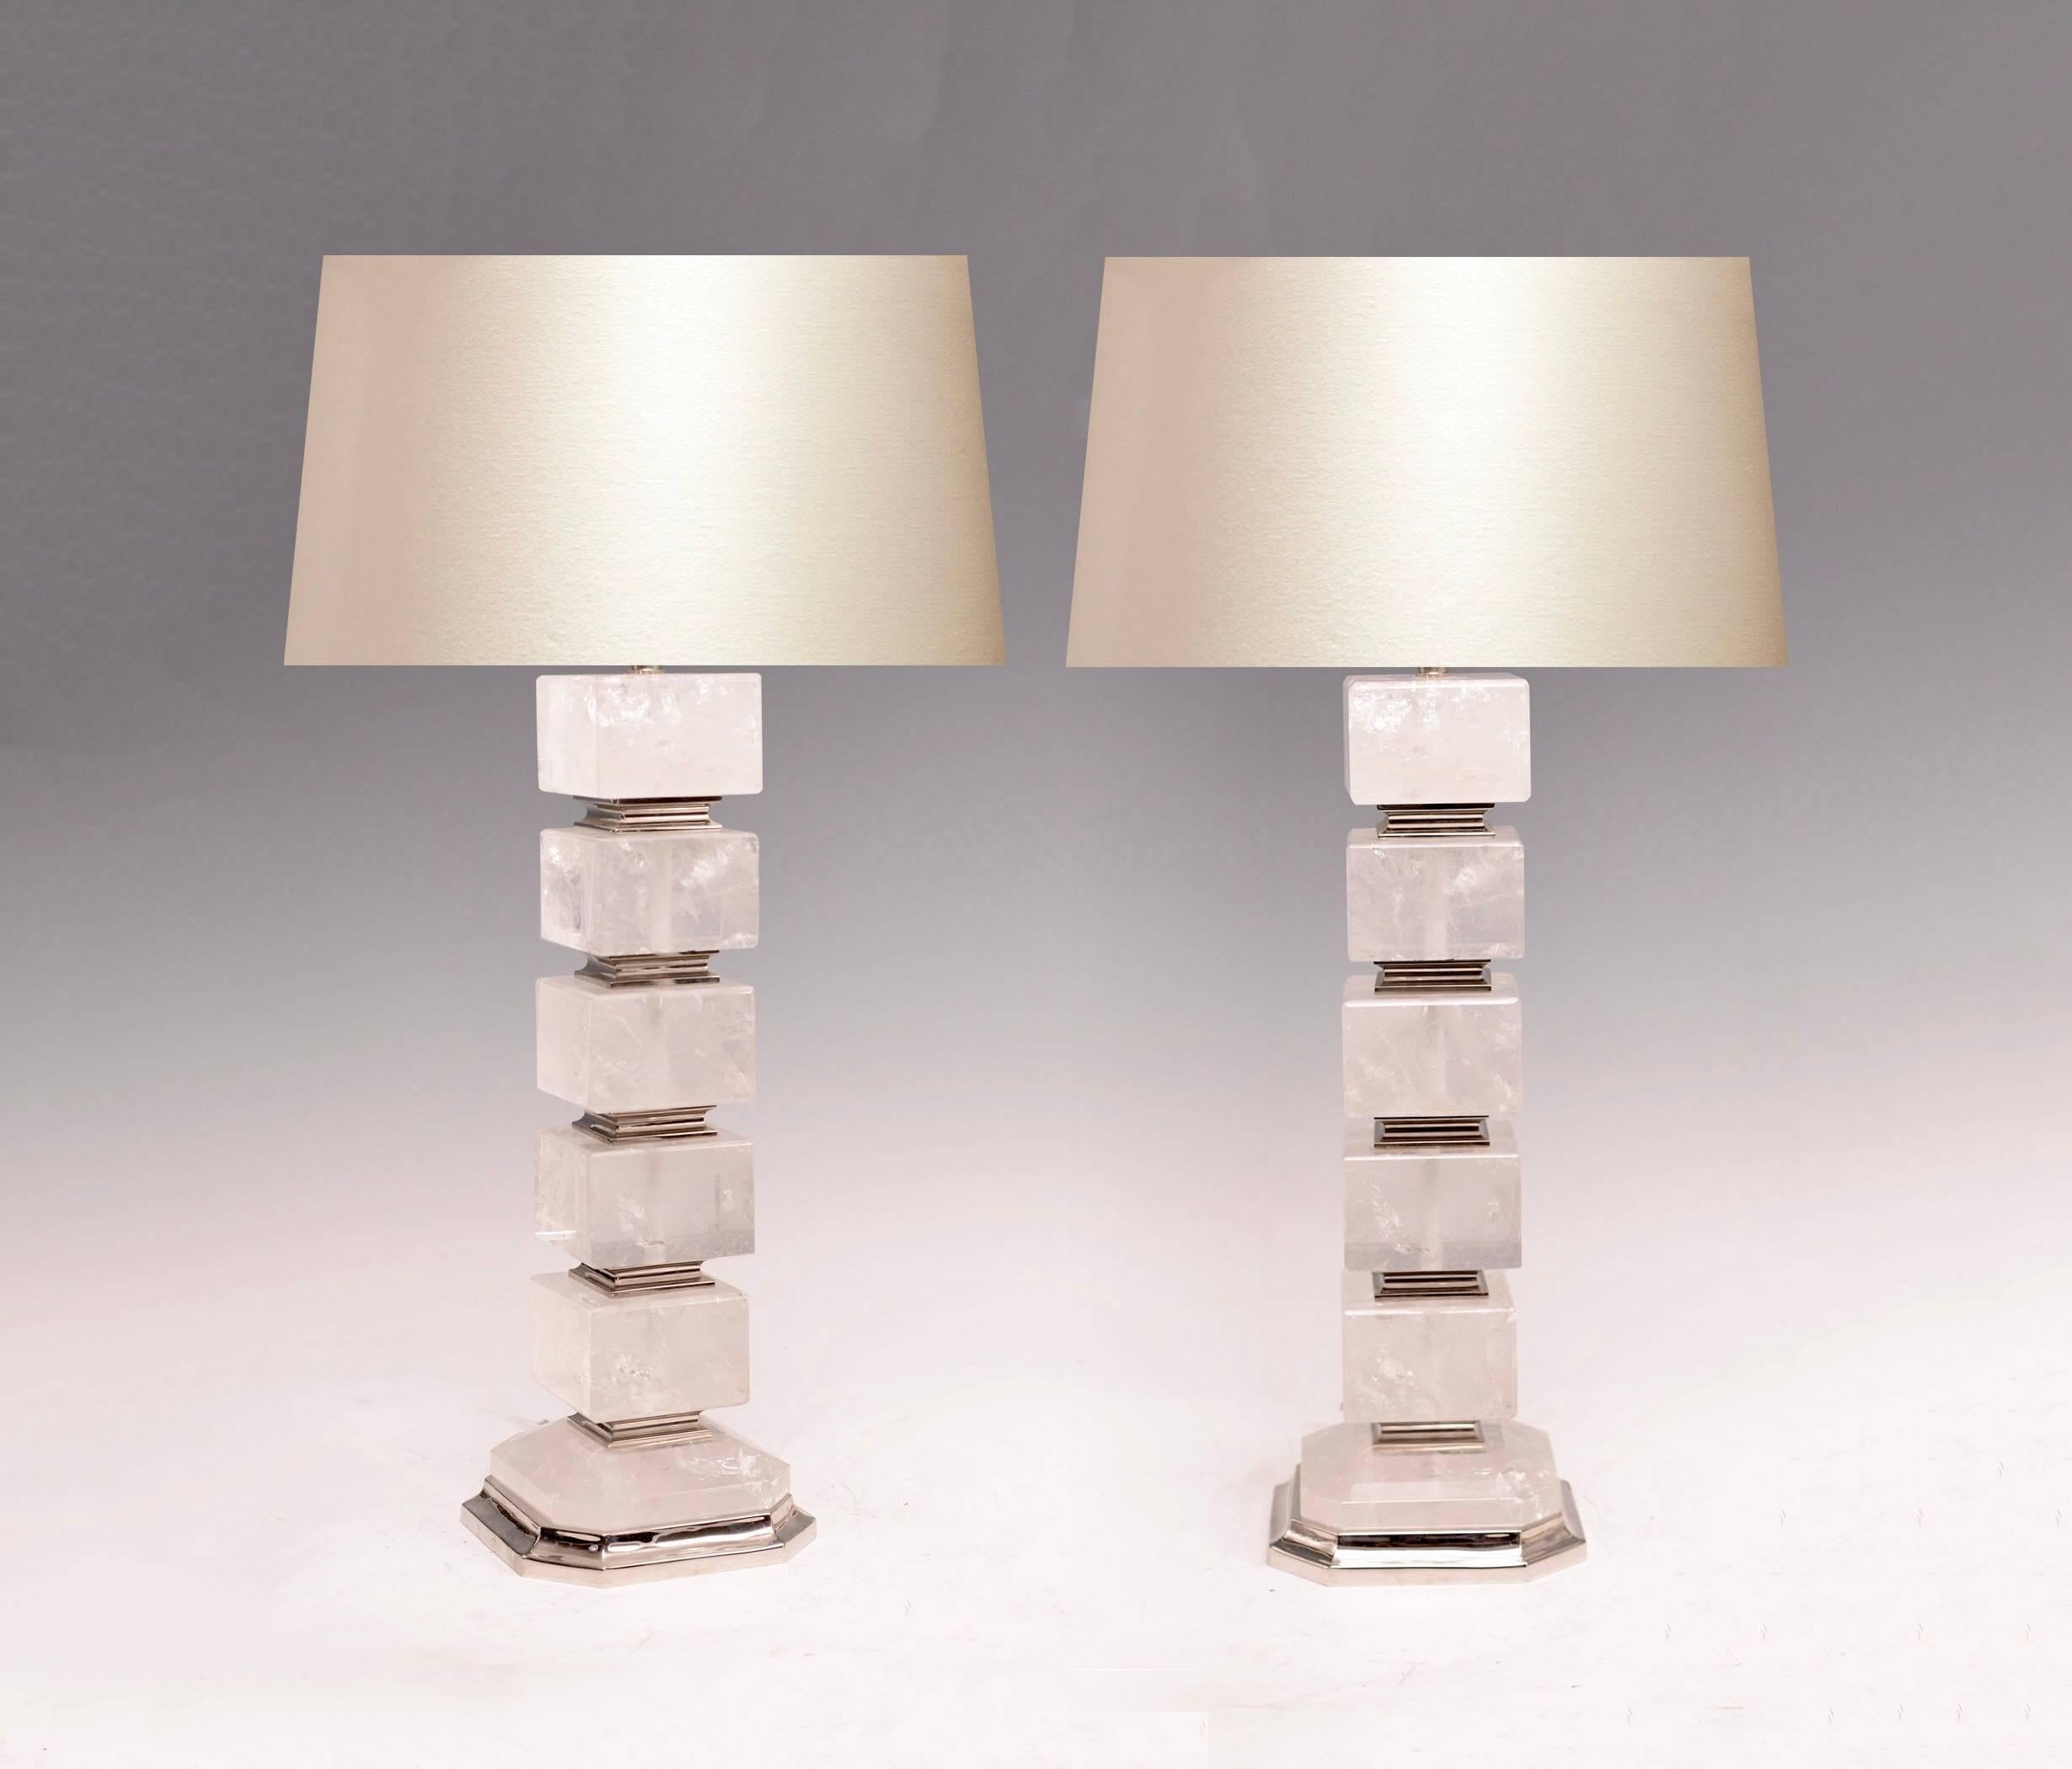 Pair of fine carved cubic form rock crystal lamps with nickel plating insertion and base, created by Phoenix Gallery, NYC.
To the rock crystal: 19 in/H
Overall Height: 30.5 in/H
lampshade not included.
